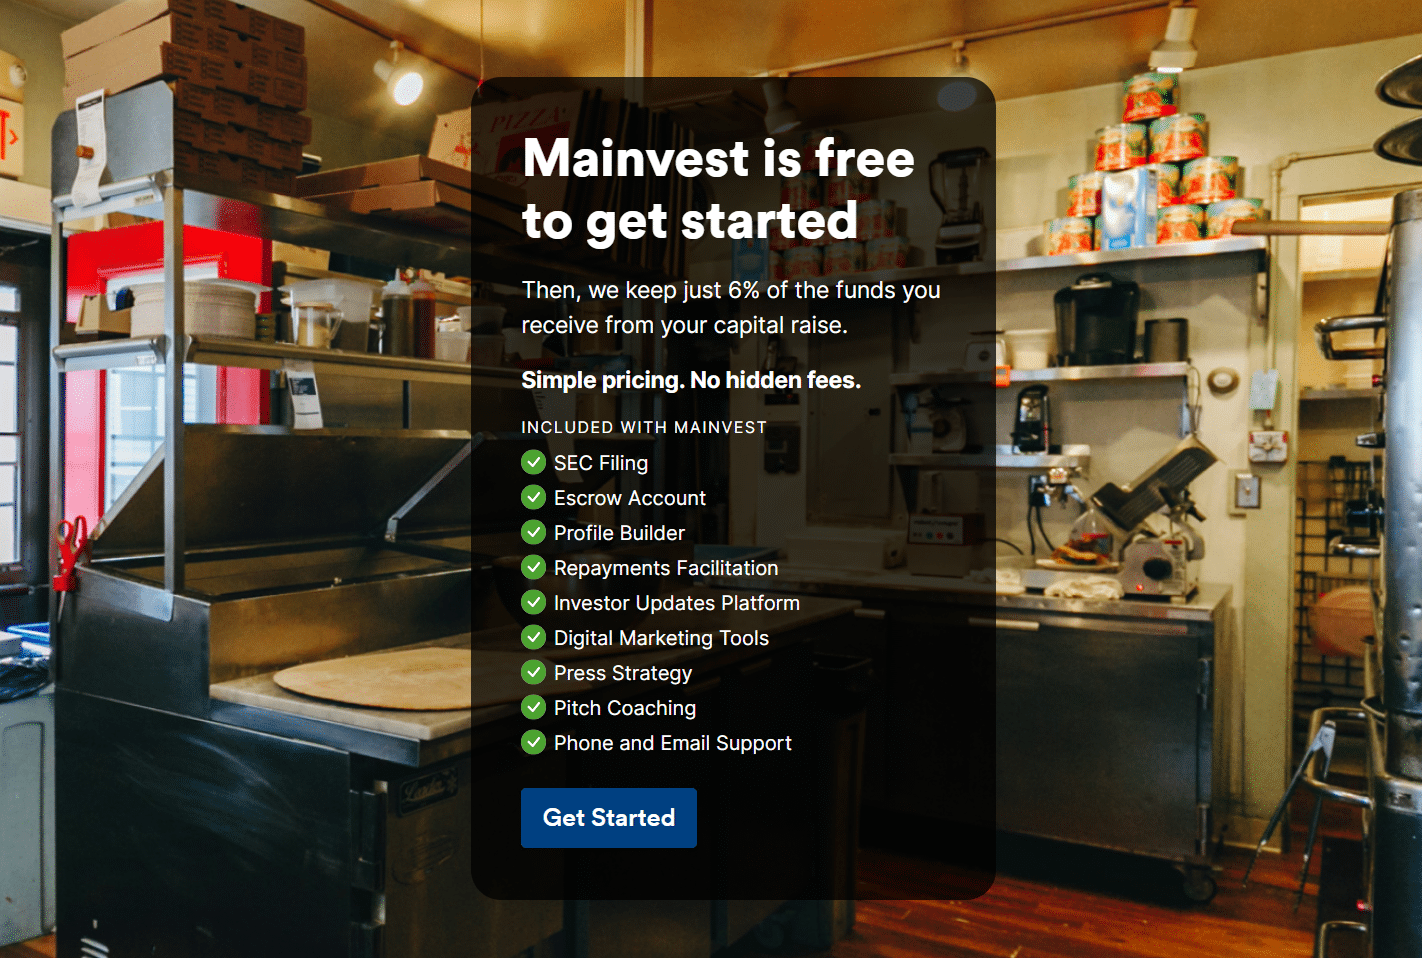 Mainvest is free to get started